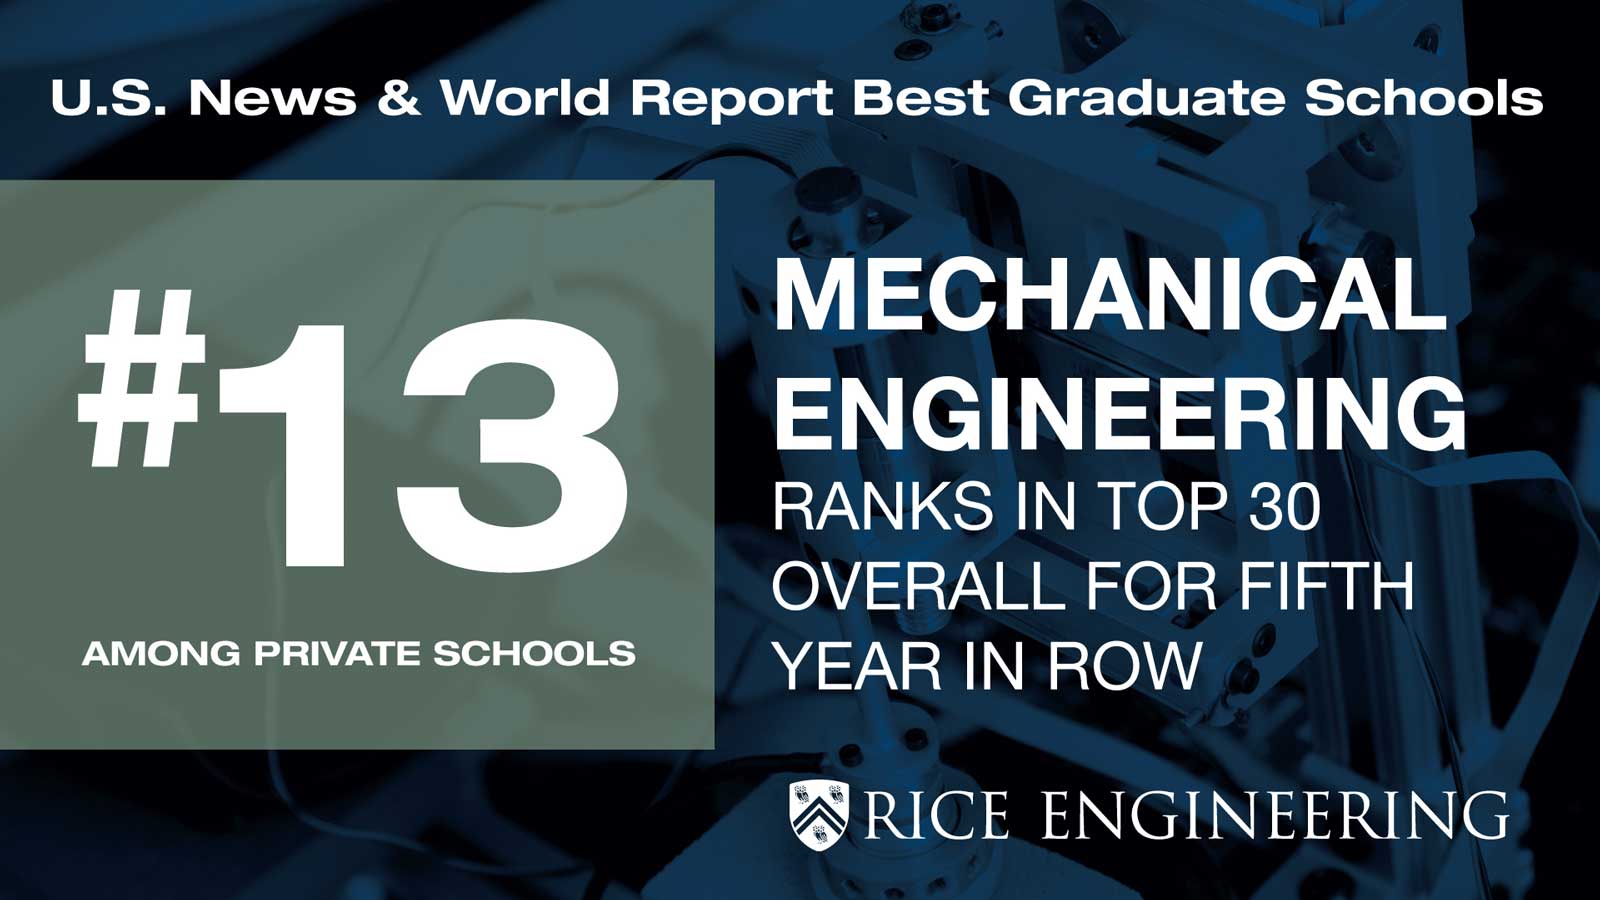 Rice mechanical engineering among nation's top 30 graduate programs for fifth year in a row